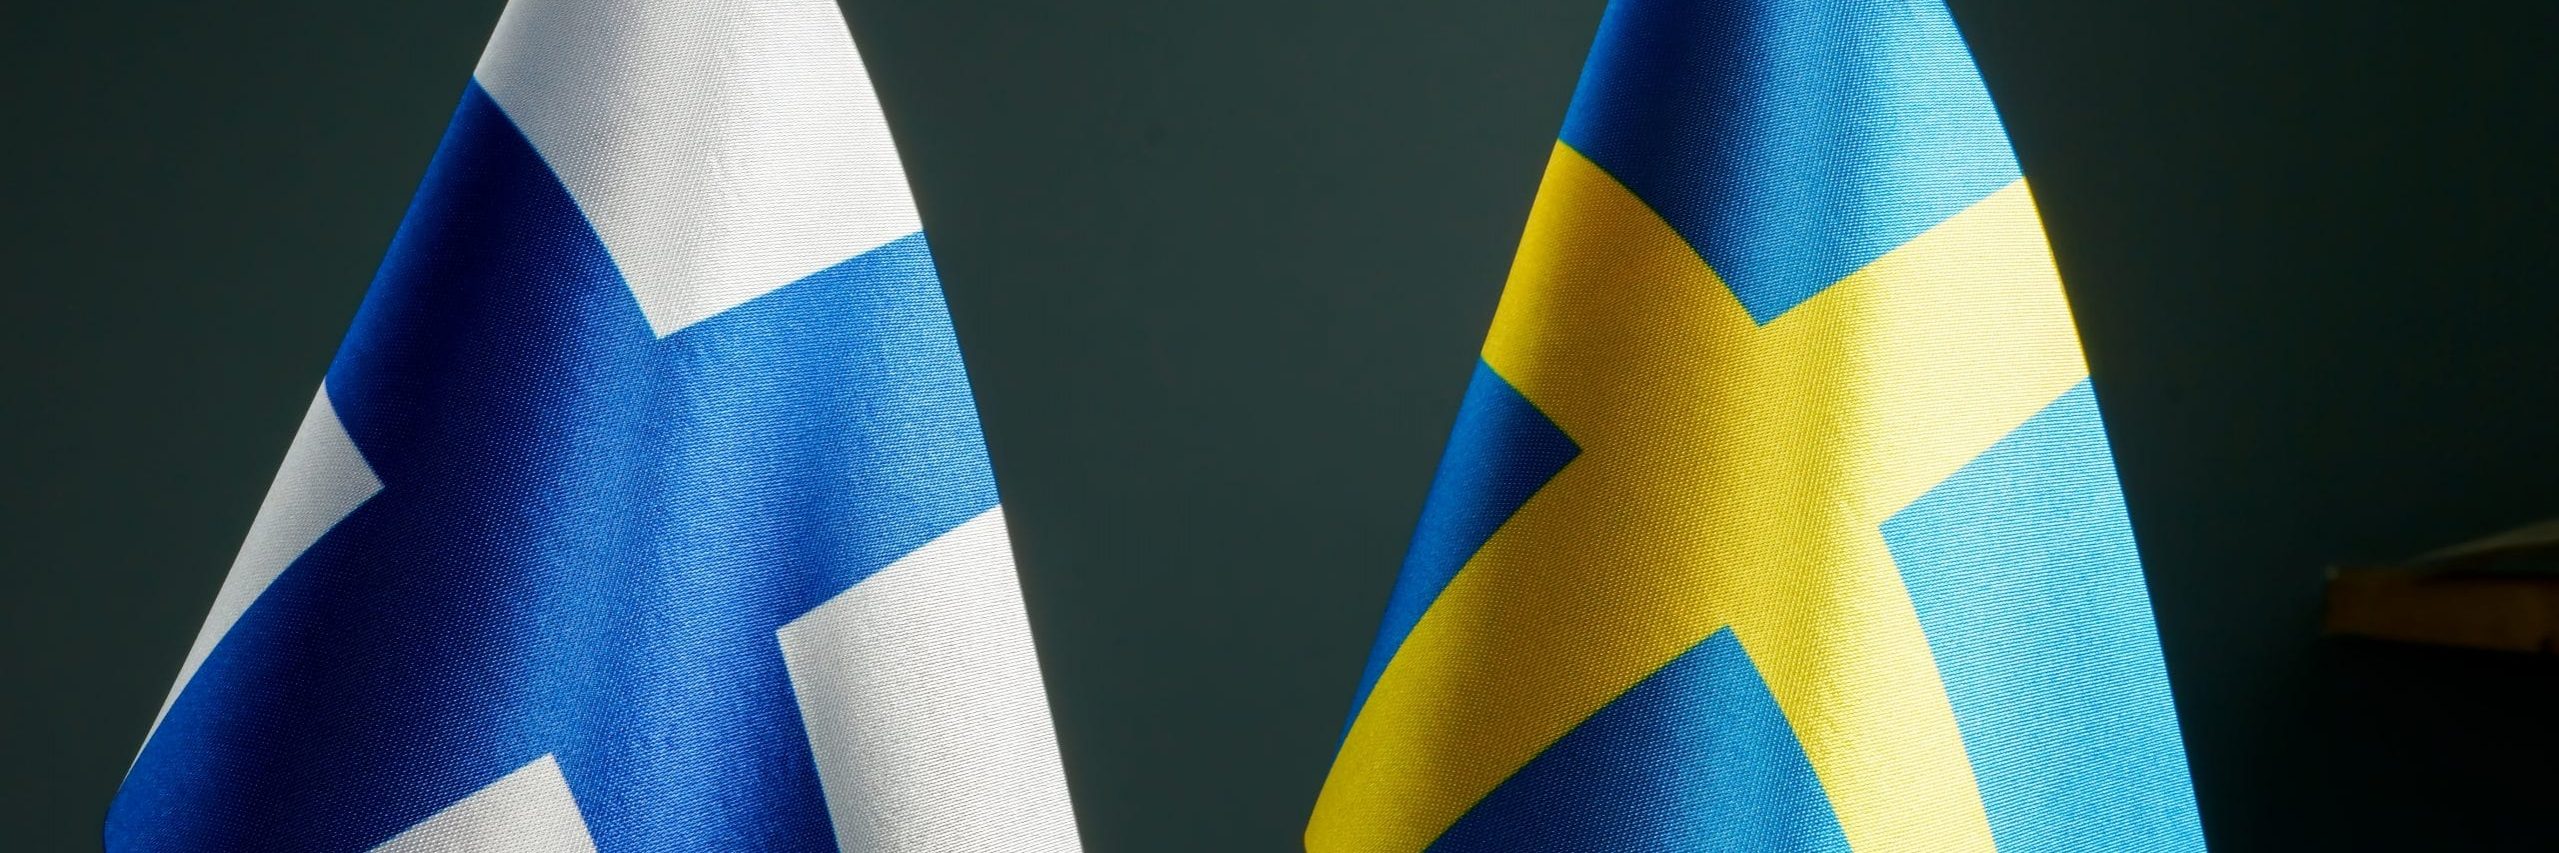 The Small Flags Of Sweden And Finland.